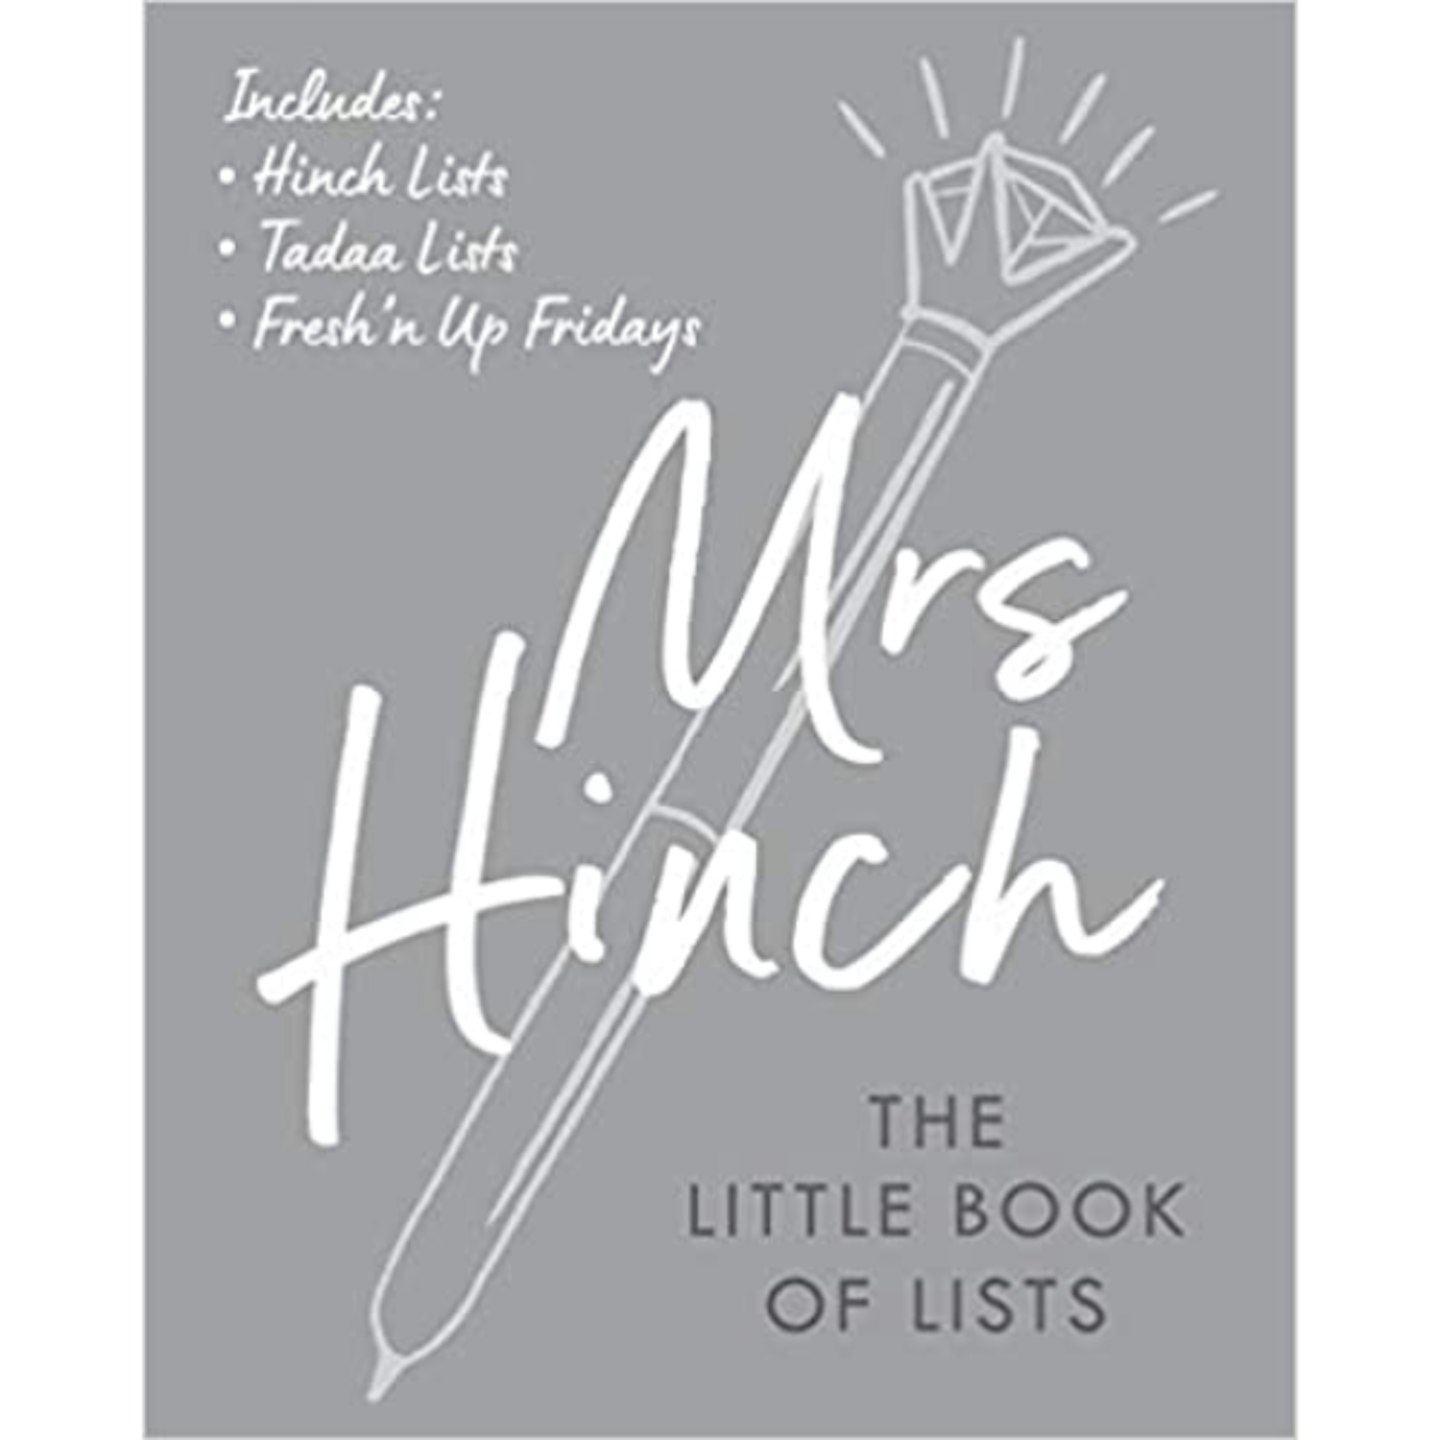 Mrs Hinch: The Little Book of Lists by Mrs Hinch  